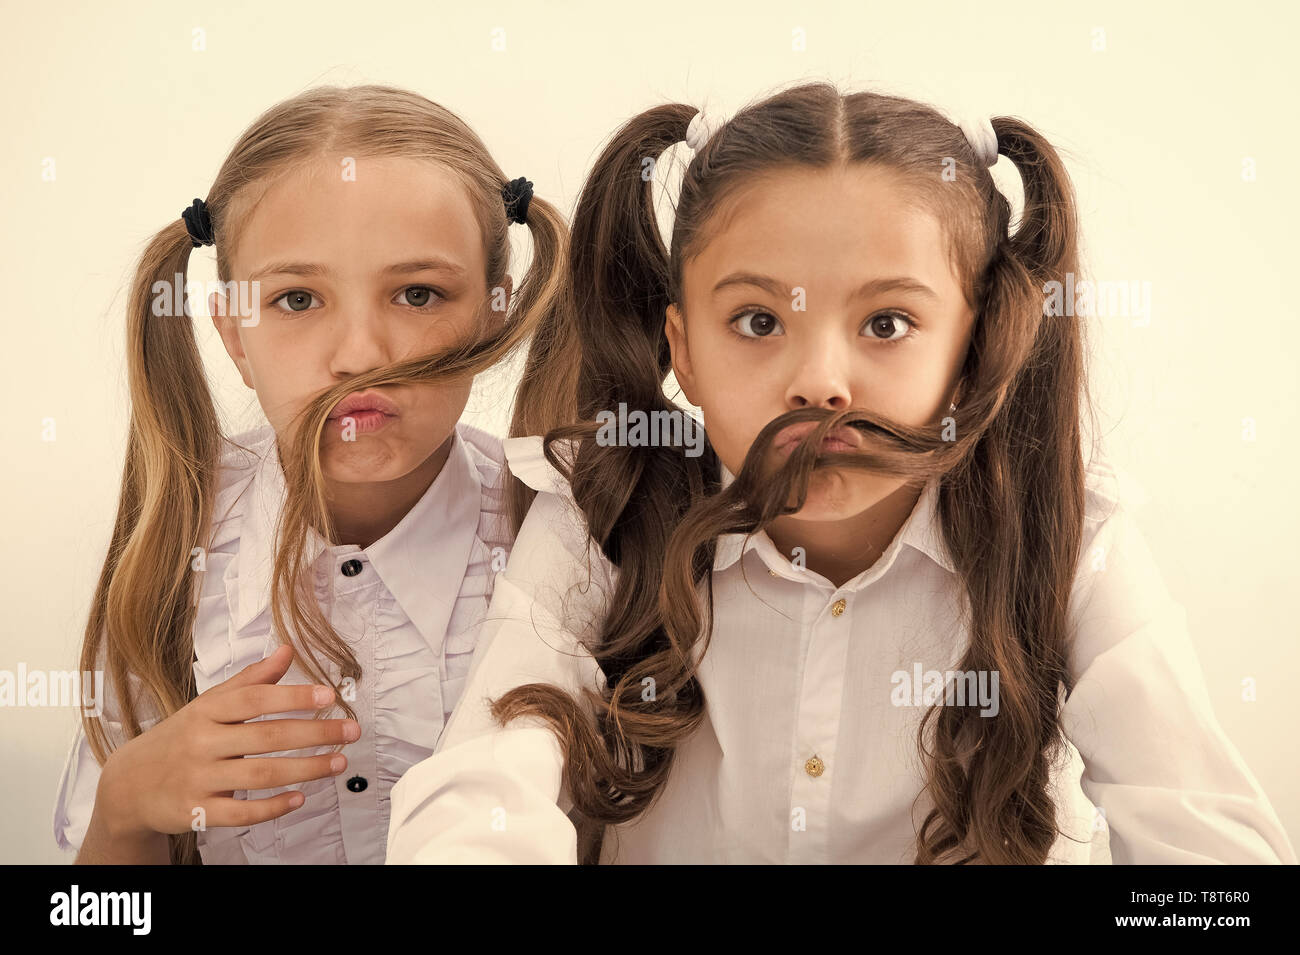 Little Girls Make Mustache With Long Hair Hairstyle Concept